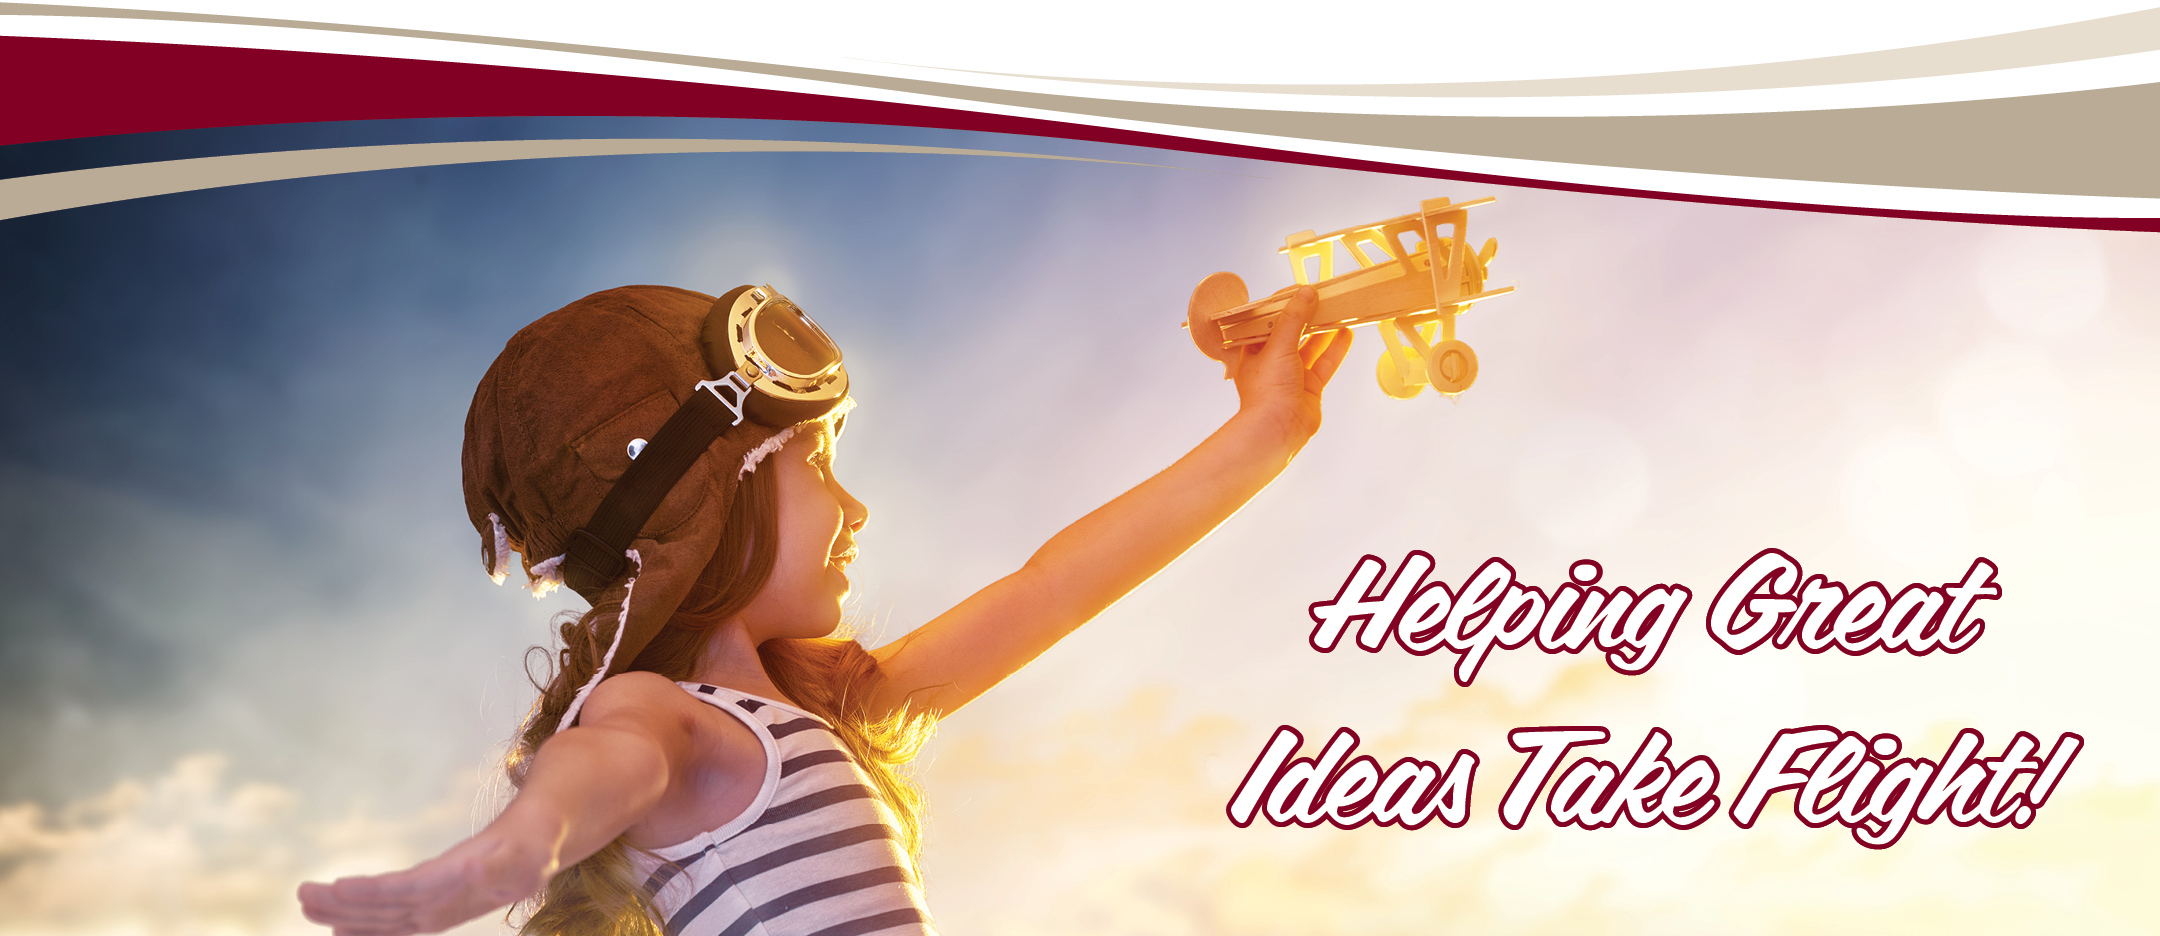 image of a girl with a toy wooden plane saying Helping great Ideas Take Flight